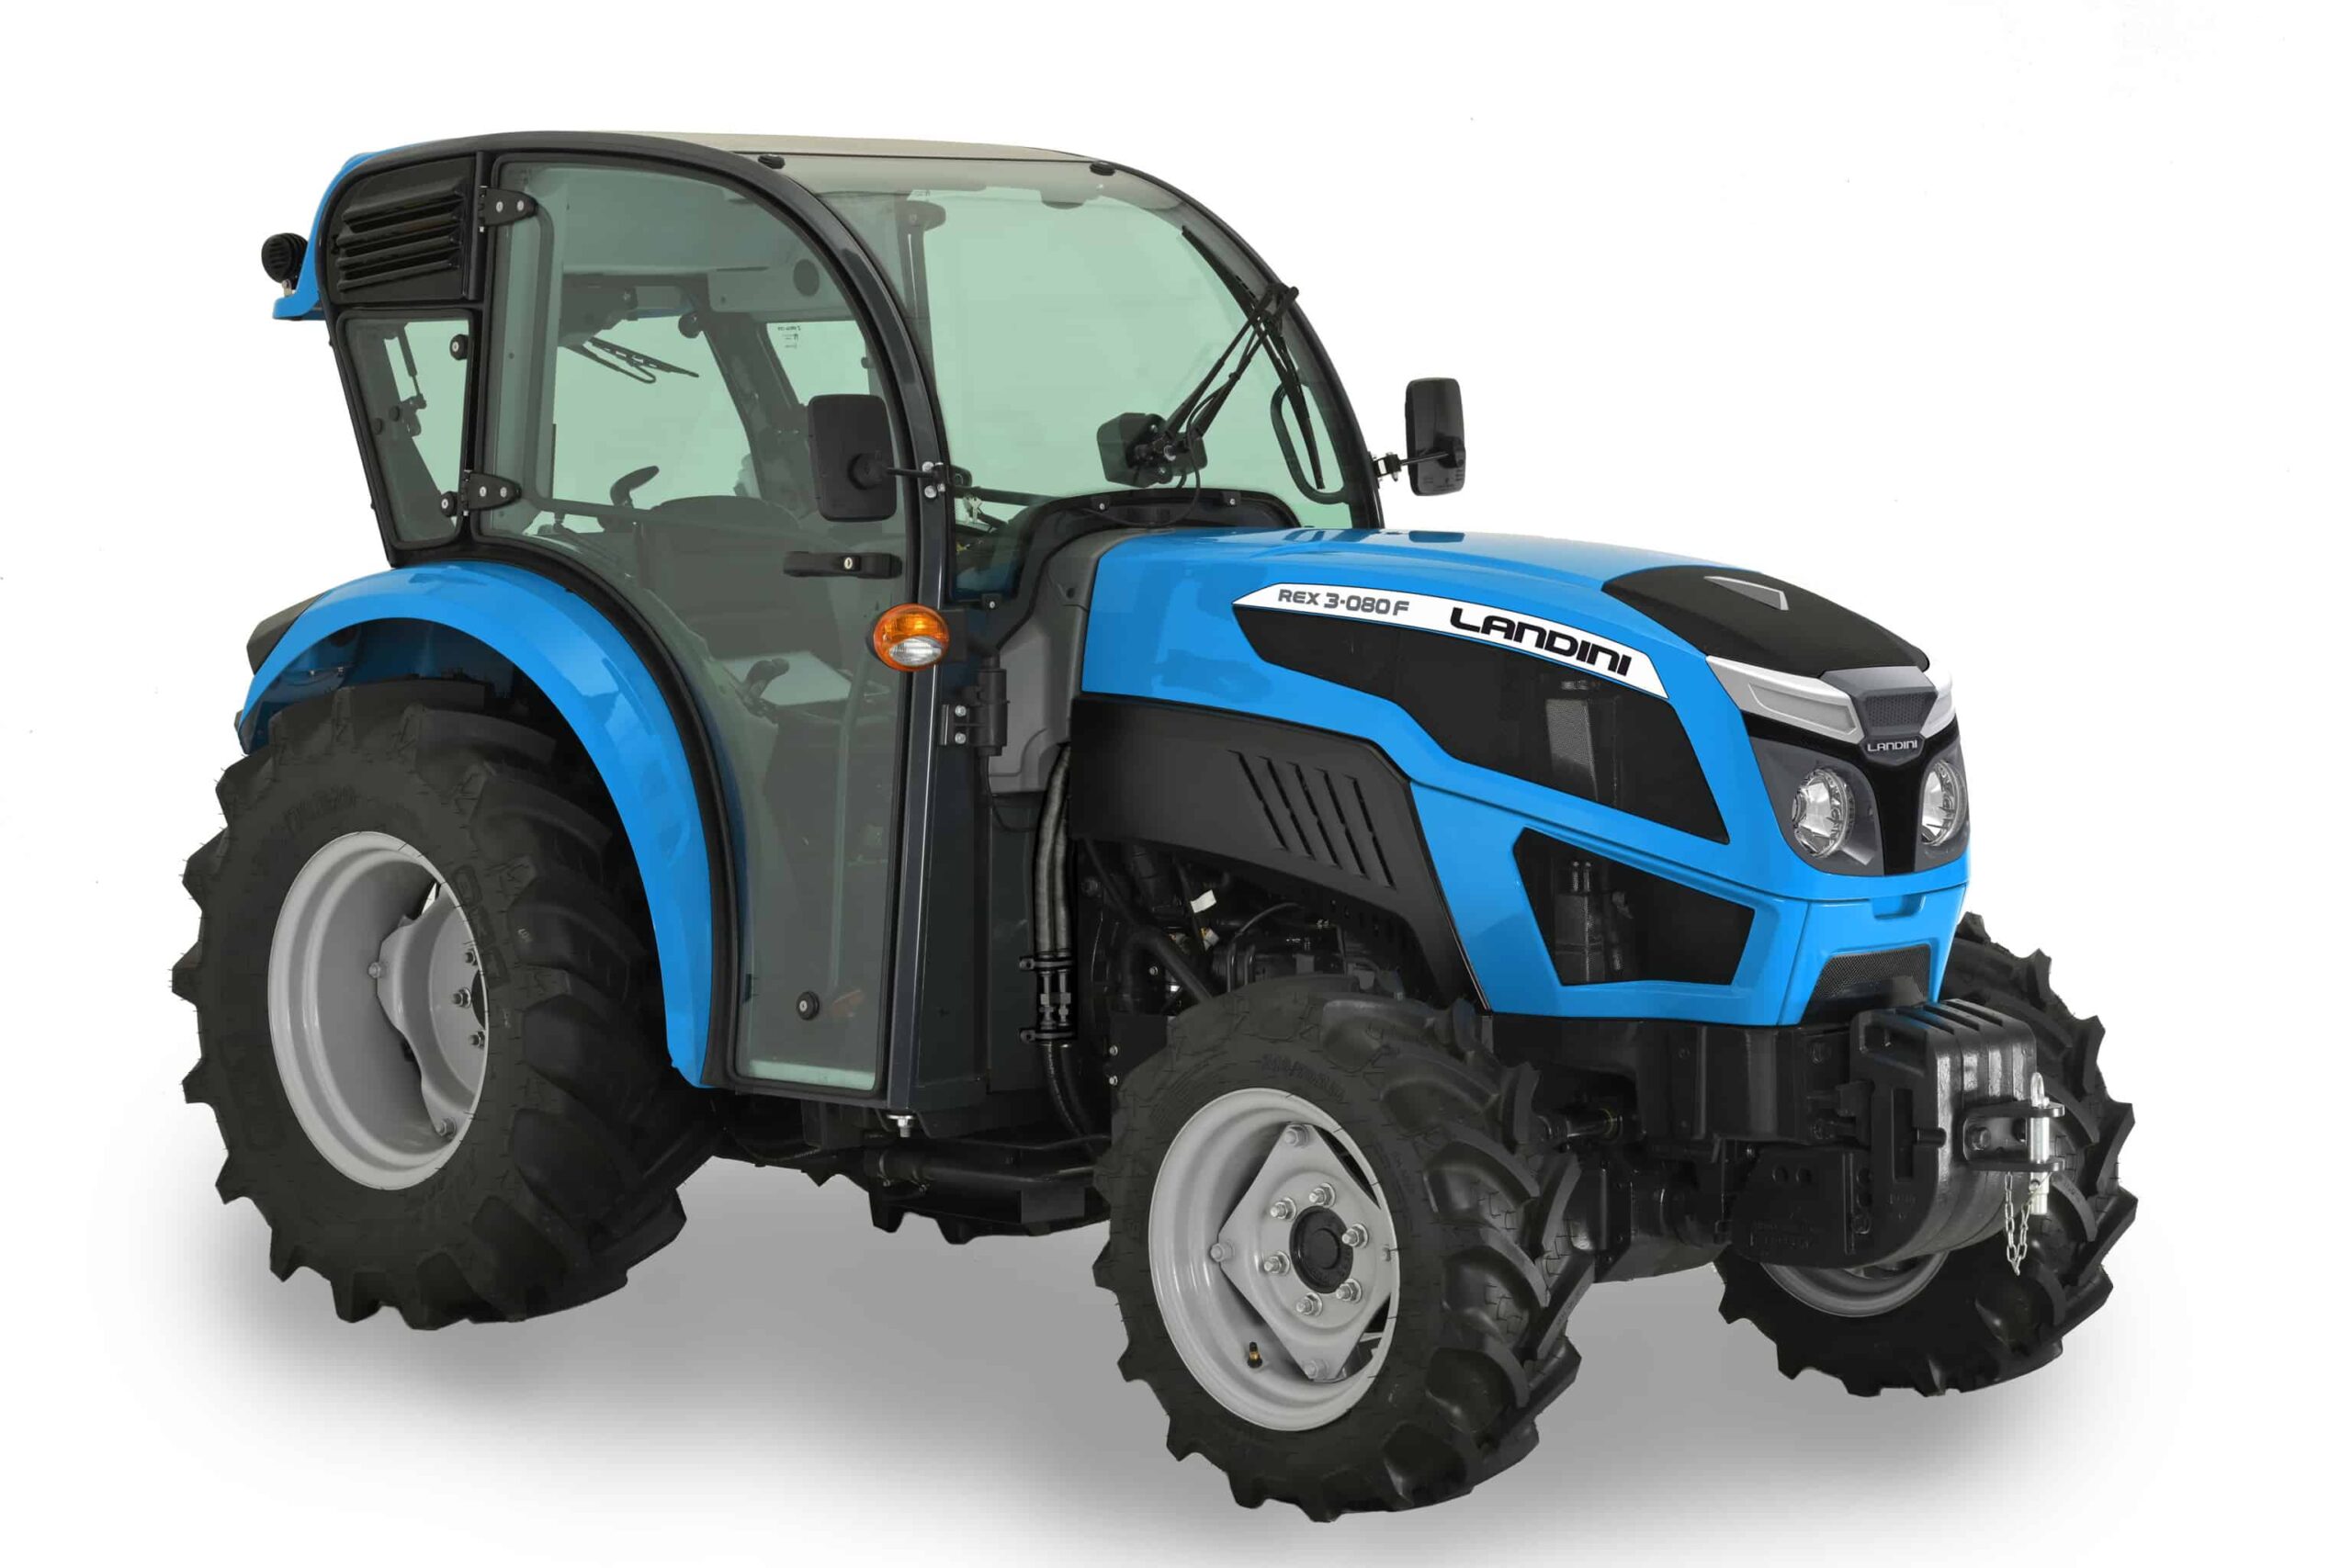 Versatility and innovation for the new Landini Rex3 F Stage V